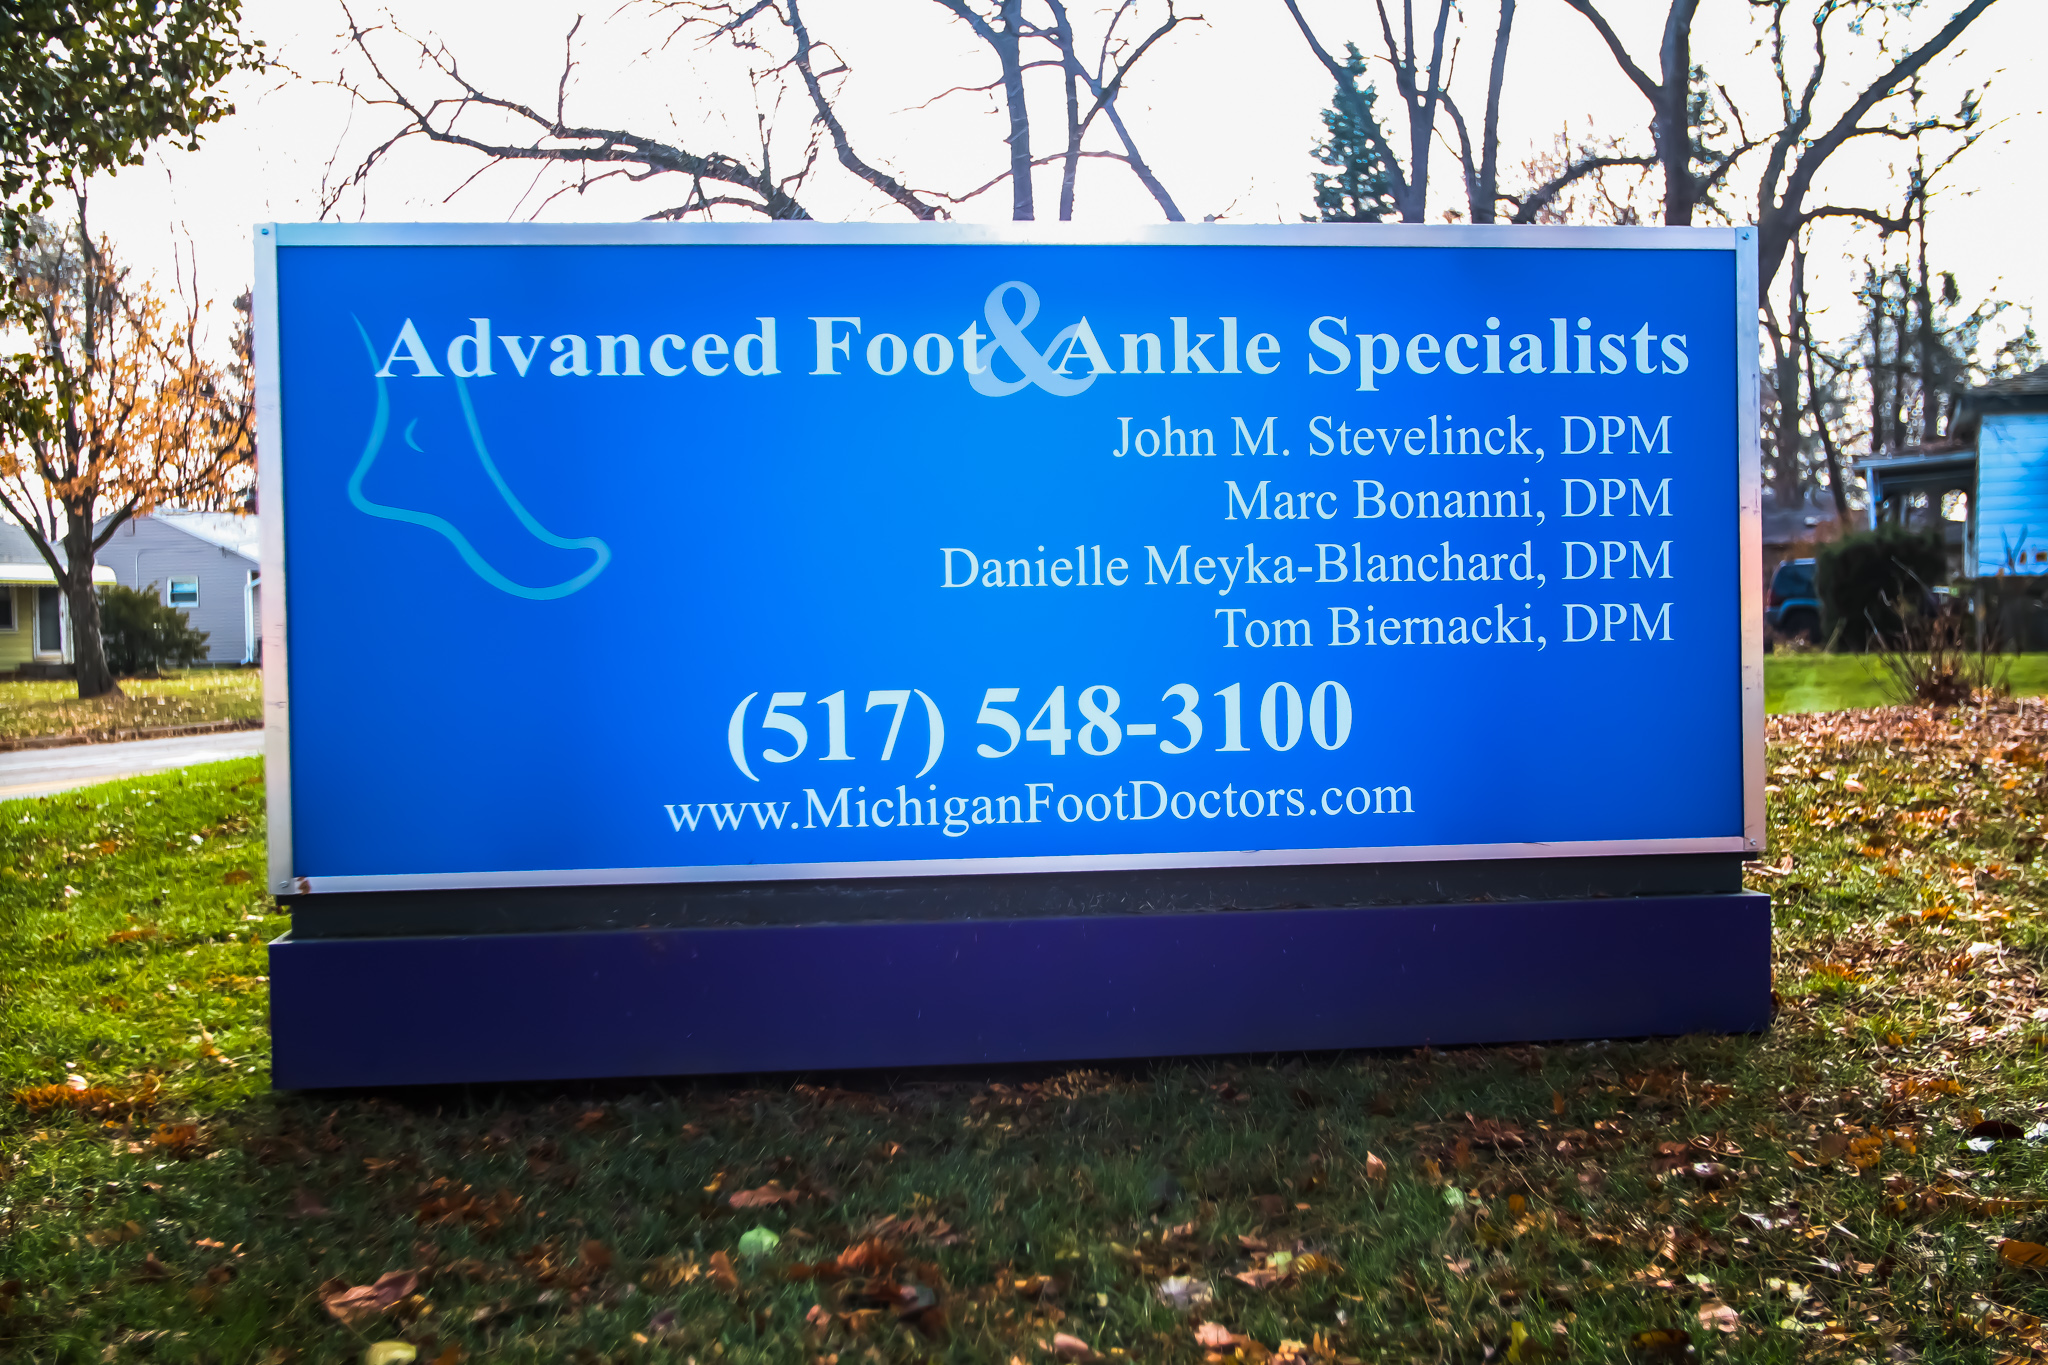 Ingrown toenail removal by podiatrists in Howell Michigan and Brighton Michigan!